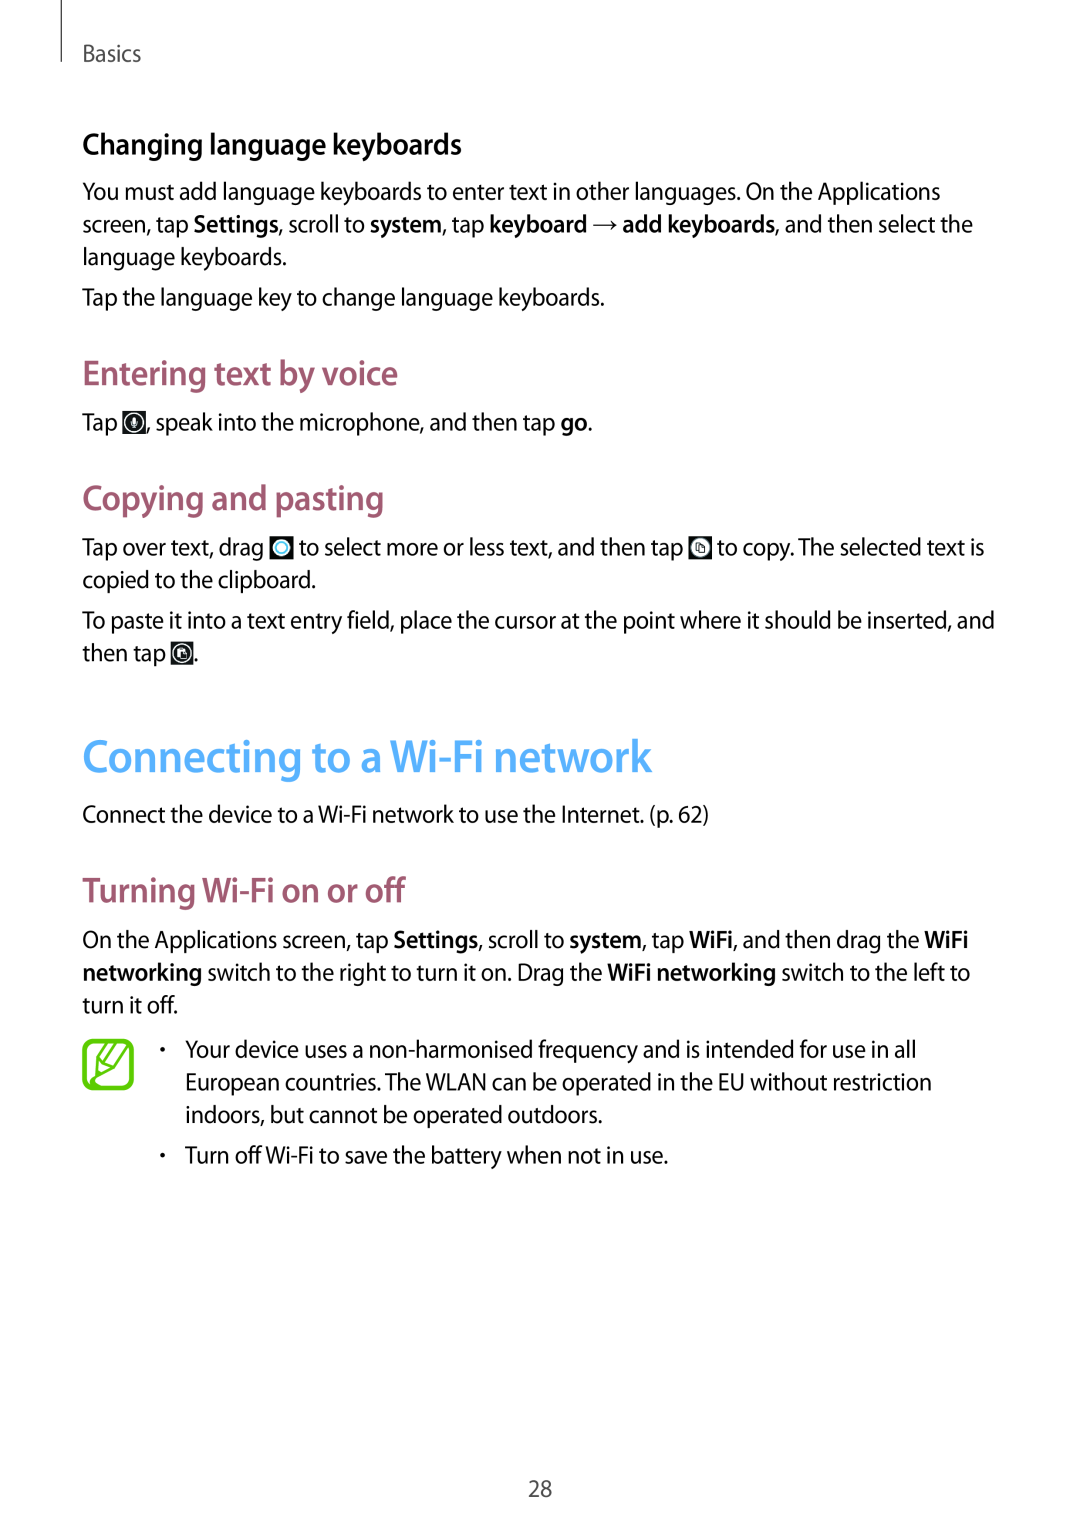 Samsung GT-I8750ALAHUI Connecting to a Wi-Fi network, Entering text by voice, Copying and pasting, Turning Wi-Fi on or off 